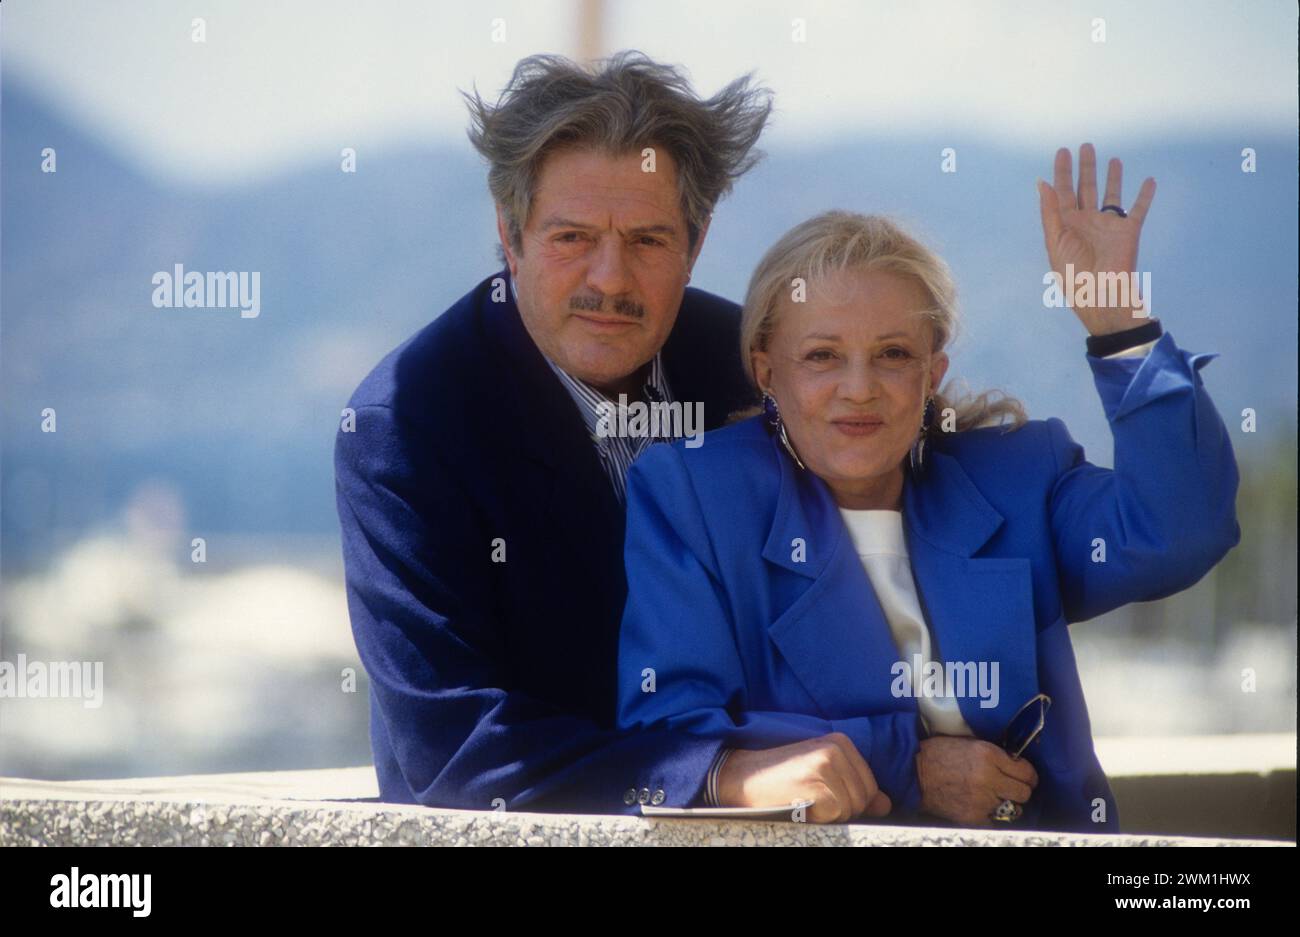 4069400 Cannes Film Festival, 1991. Actors Marcello Mastroianni, And Jeanne Moreau starring of the movie 'The Suspended Step of the Stork' (To meteoro vima tou pelargou) directed by Theo Angelopoulos (photo); (add.info.: Cannes, France; Francia,   Festival del Cinema di Cannes 1991. Gli attori Marcello Mastroianni E Jeanne Moreau, in concorso con il film 'Il passo sospeso della cicogna' (To meteoro vima tou pelargou) di Theo Angelopoulos); © Marcello Mencarini. All rights reserved 2024. Stock Photo